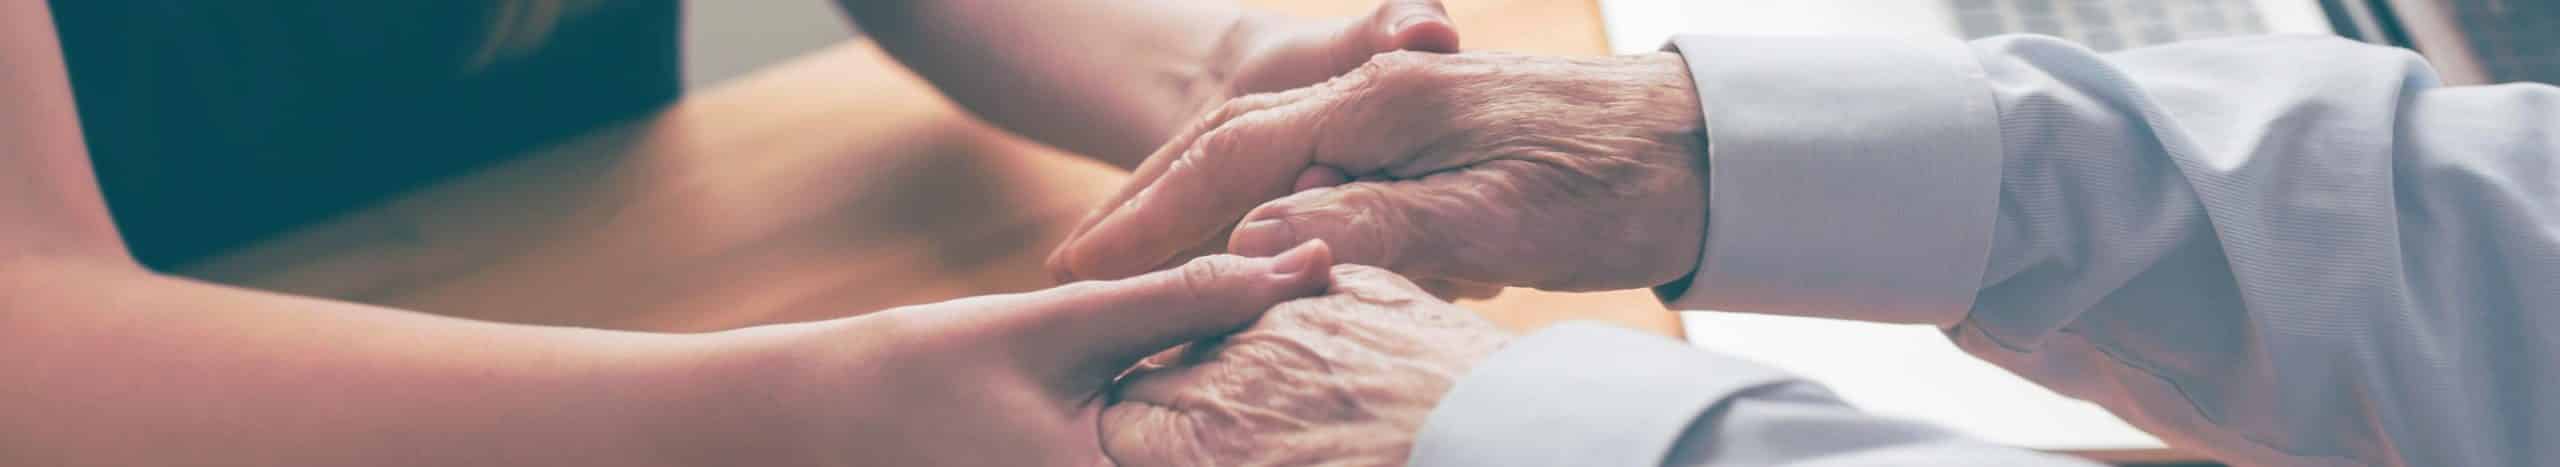 The Importance of Self-Care for Caregivers